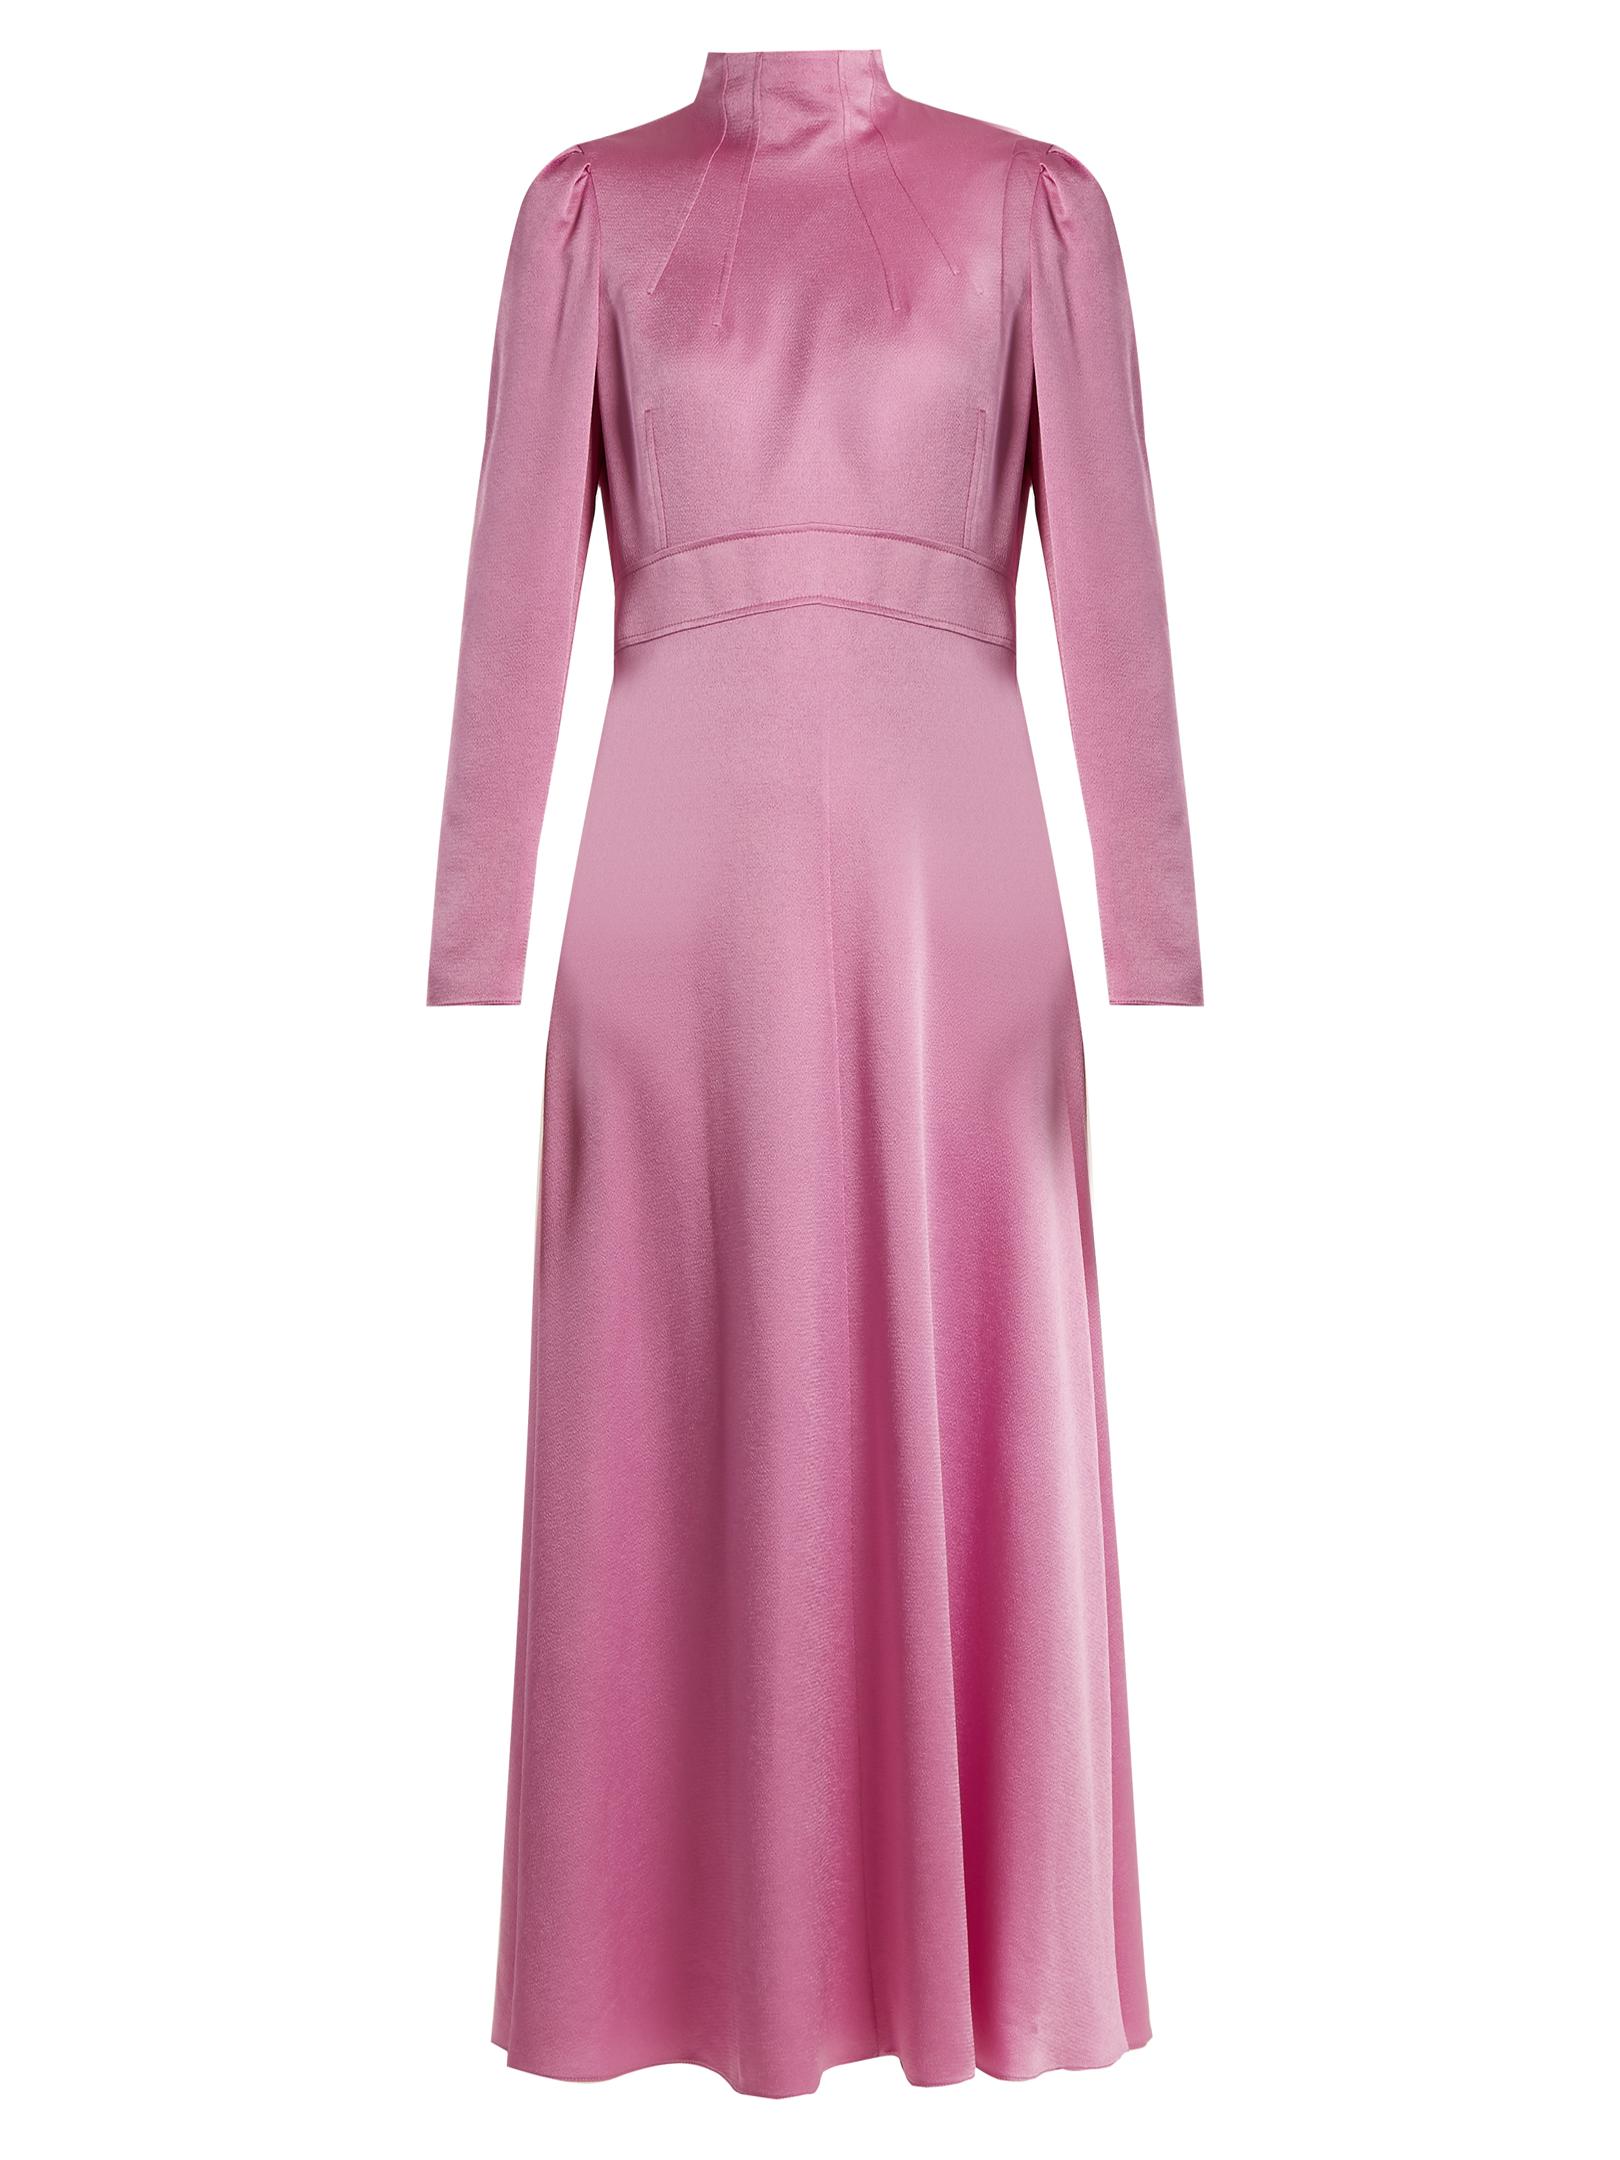 Valentino Long-sleeved Hammered-satin Dress in Pink | Lyst